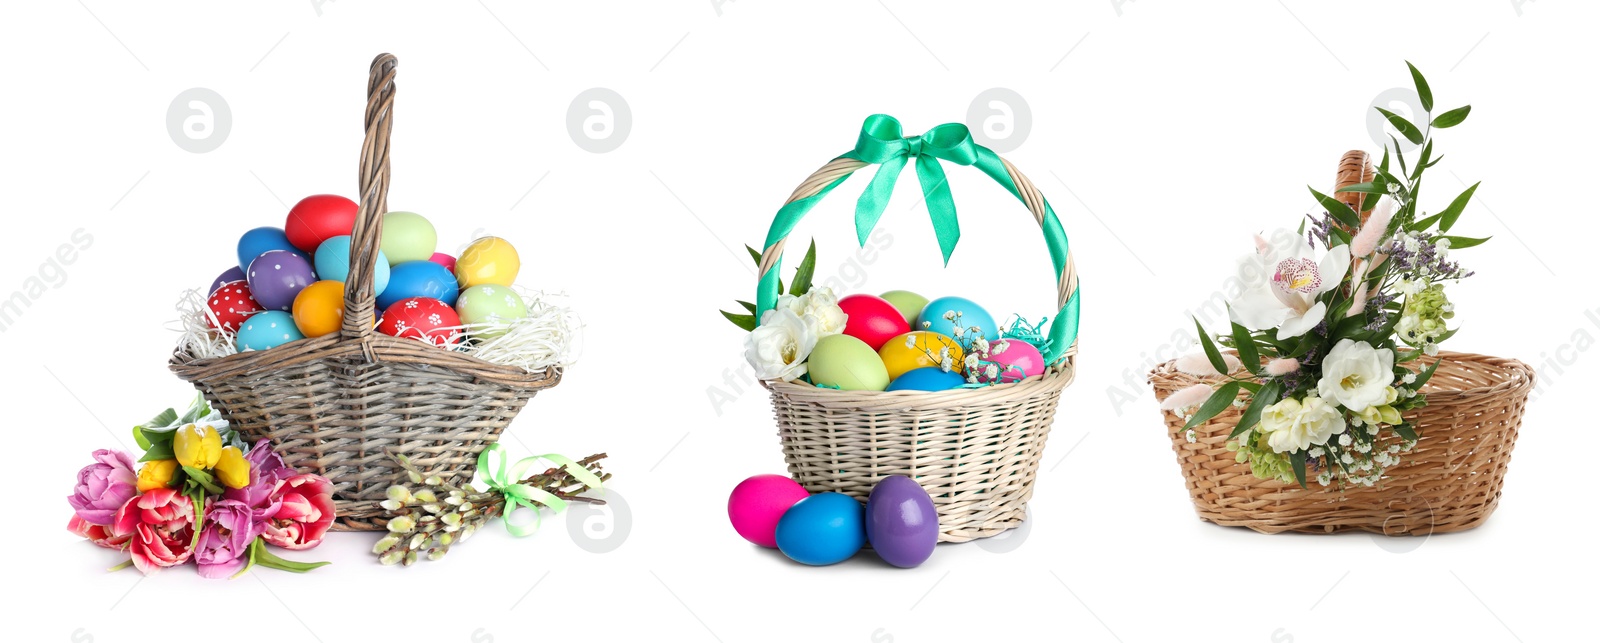 Image of Set with wicker baskets on white background, banner design. Easter item